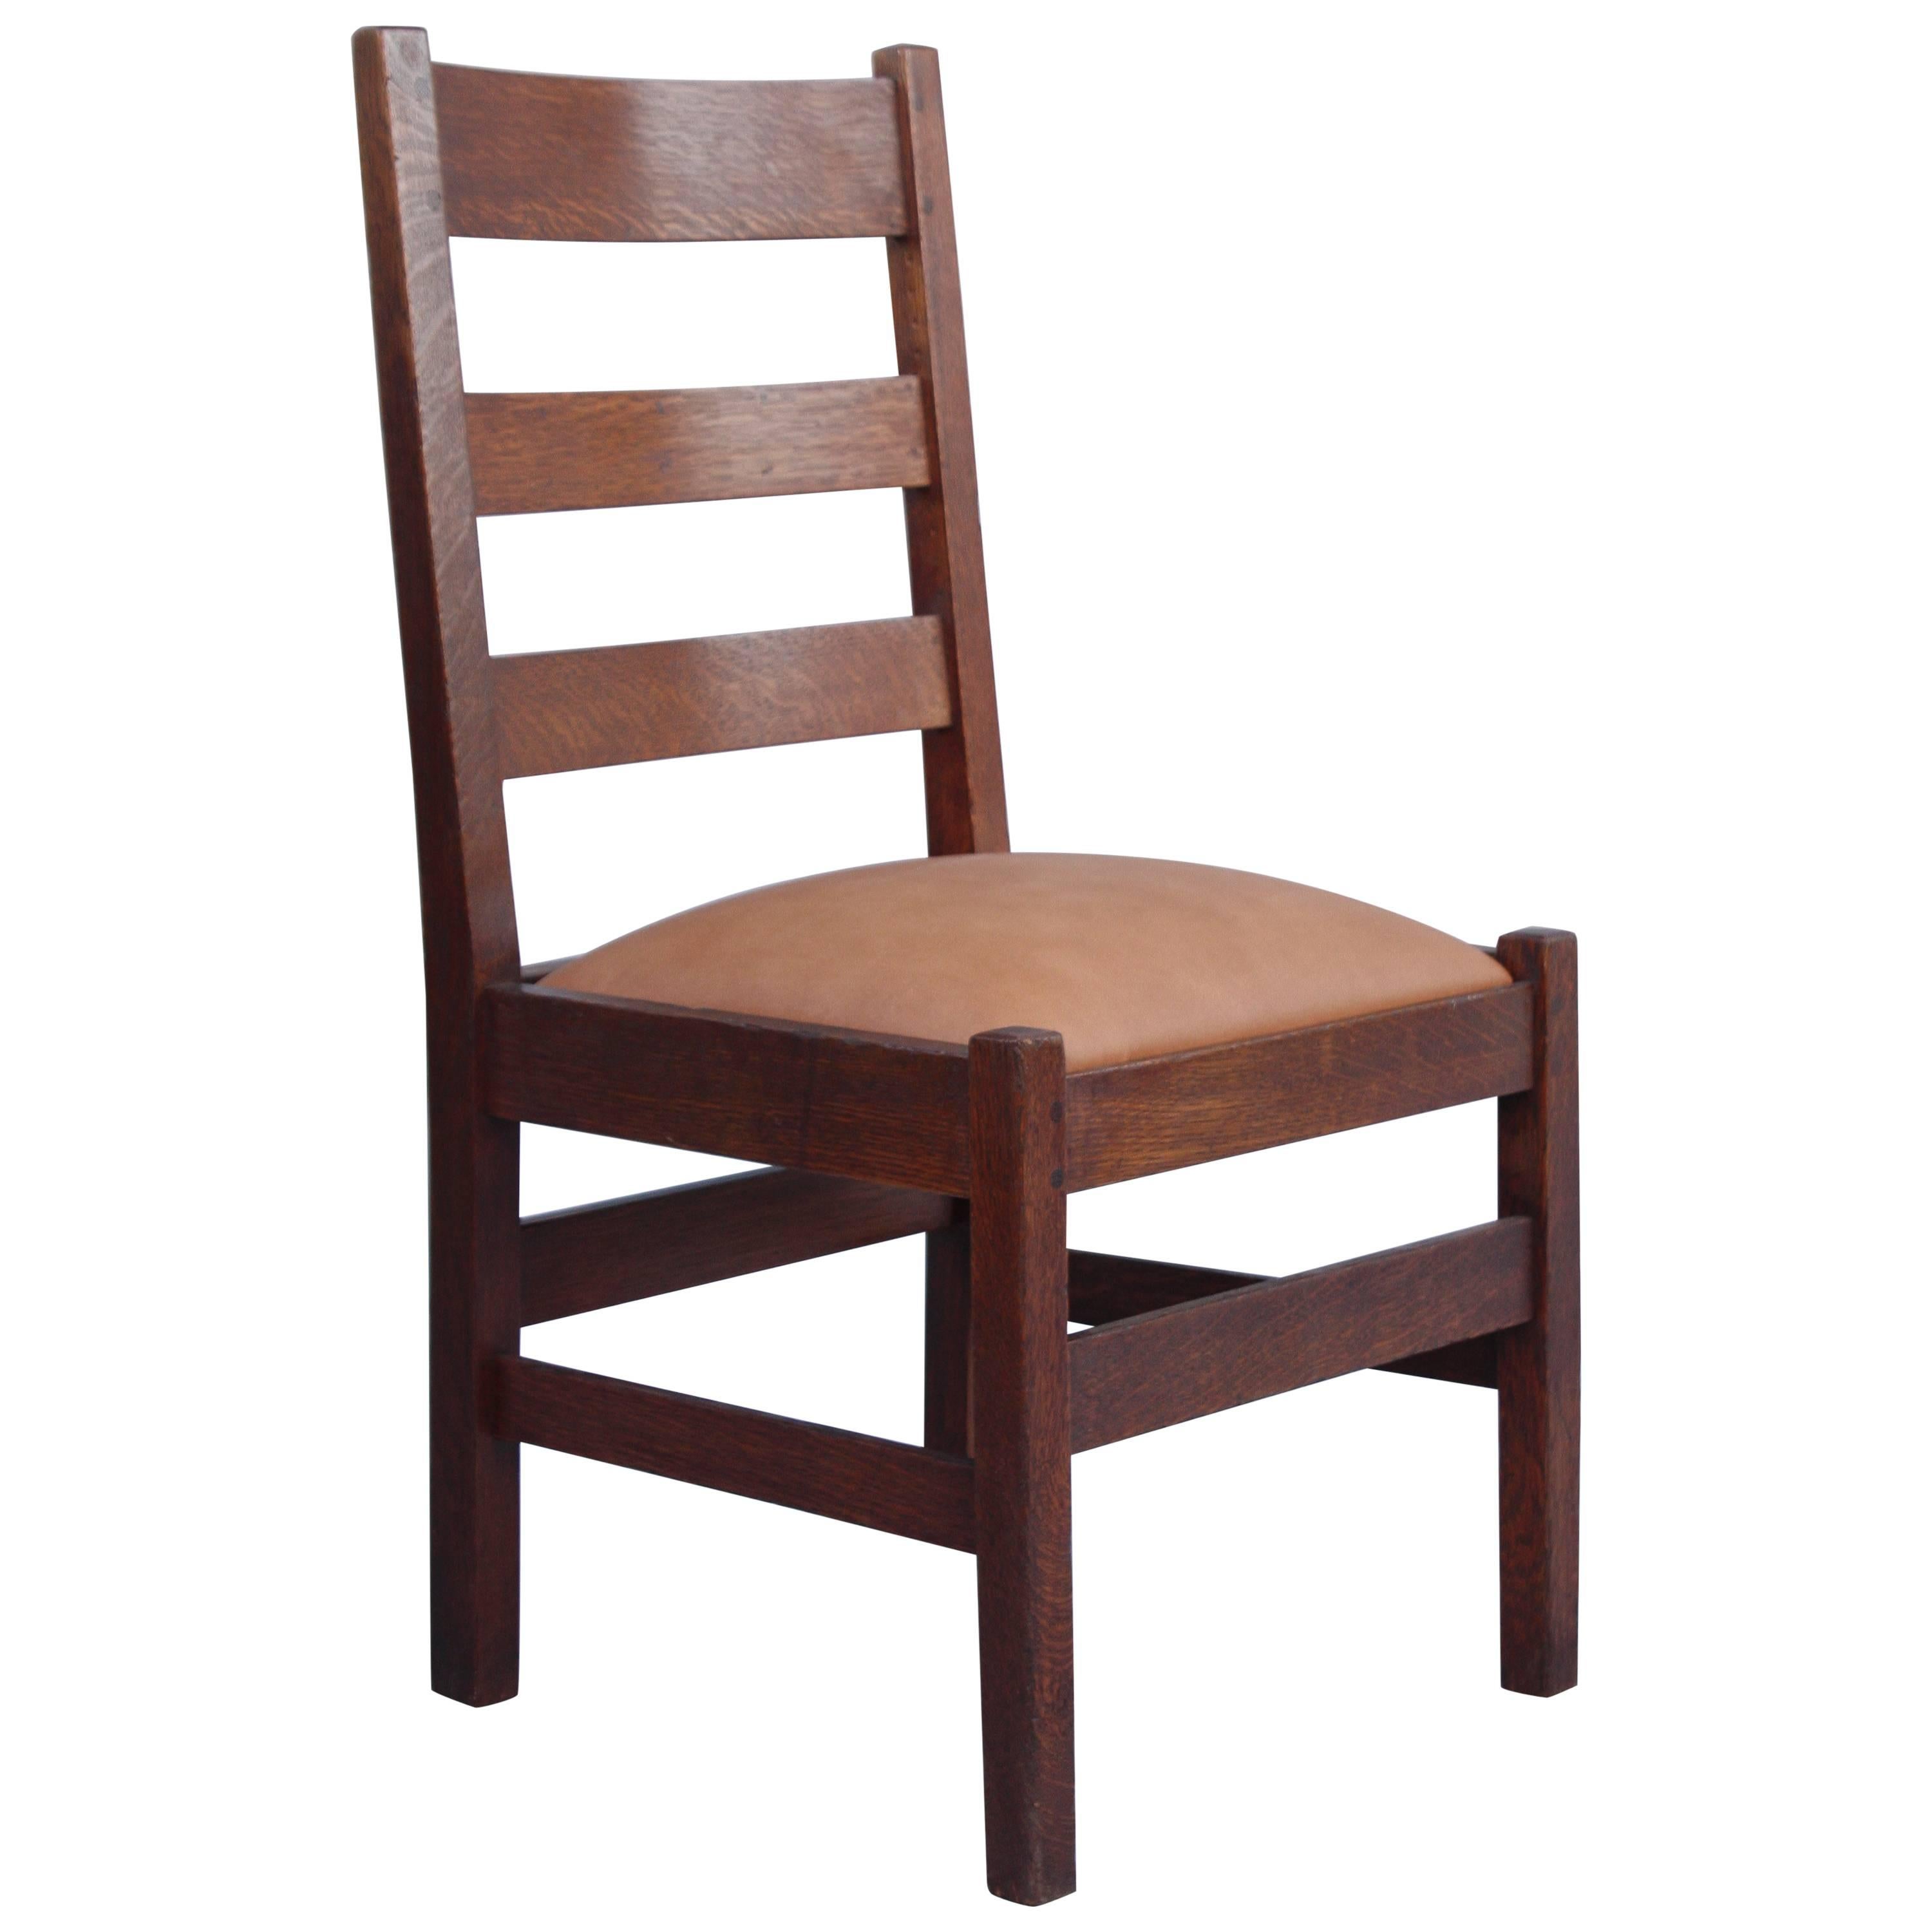 1910 Arts & Crafts Ladder Back Chair For Sale